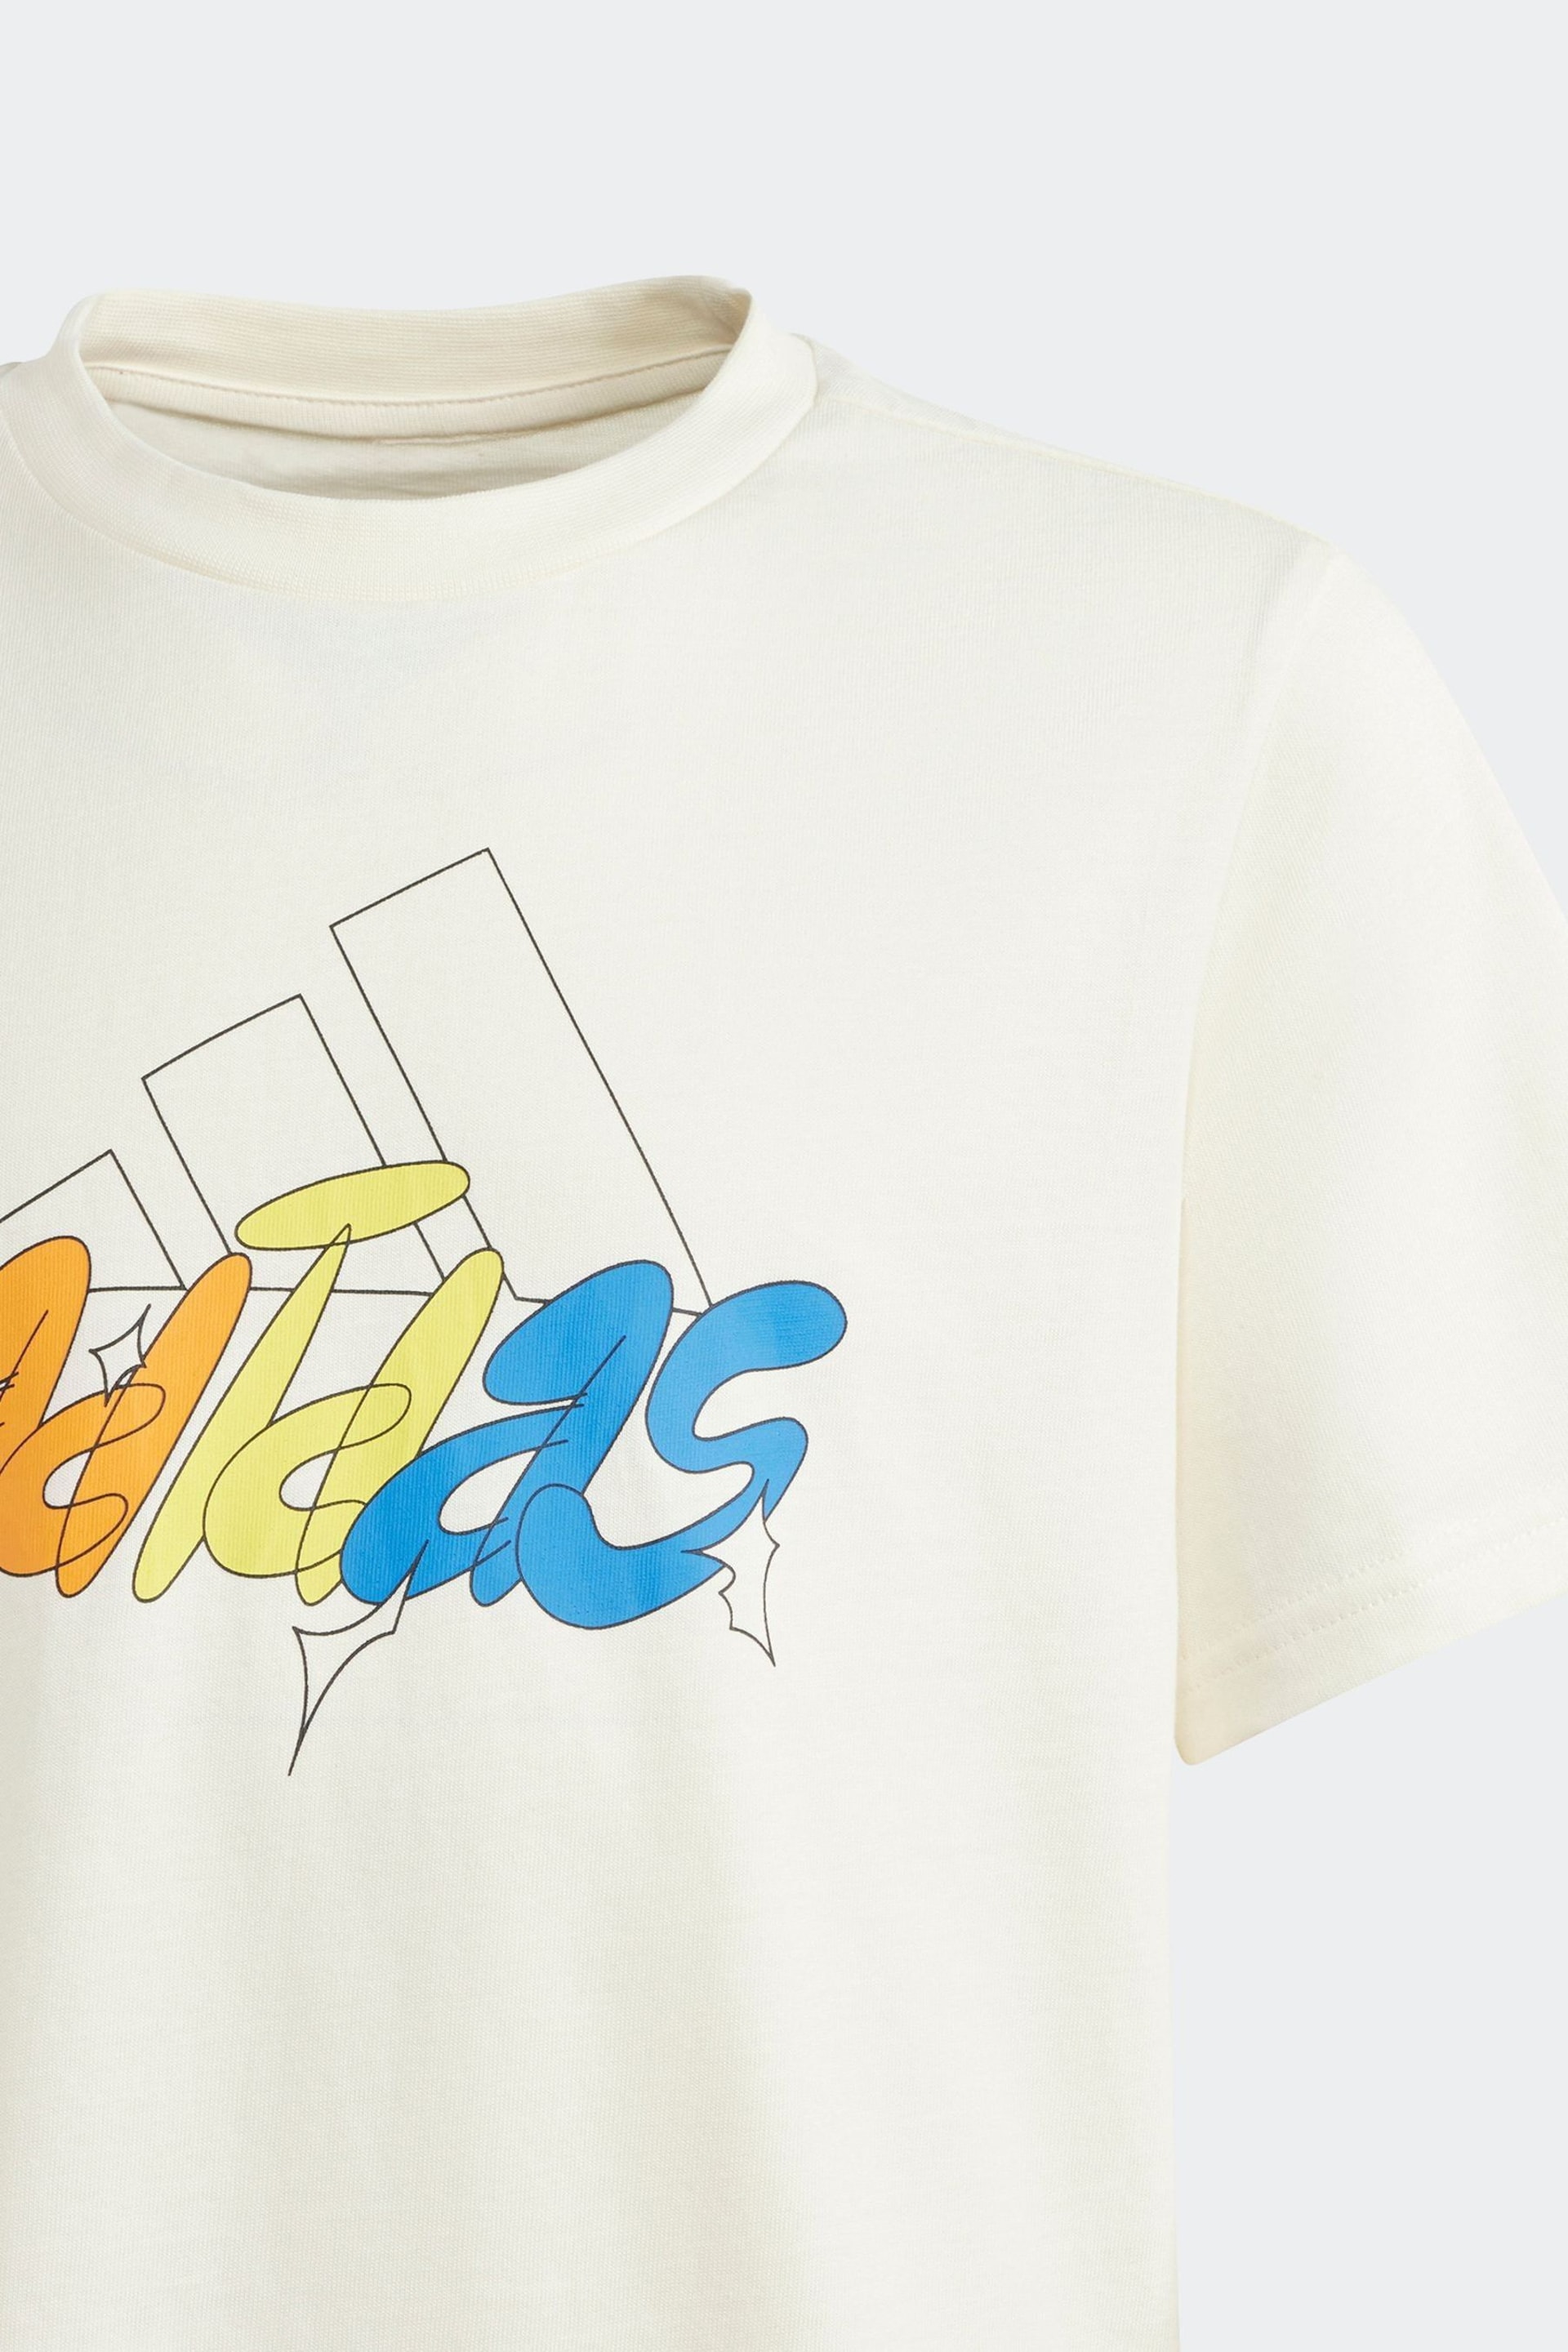 adidas White Sportswear Table Illustrated Graphic T-Shirt - Image 3 of 5